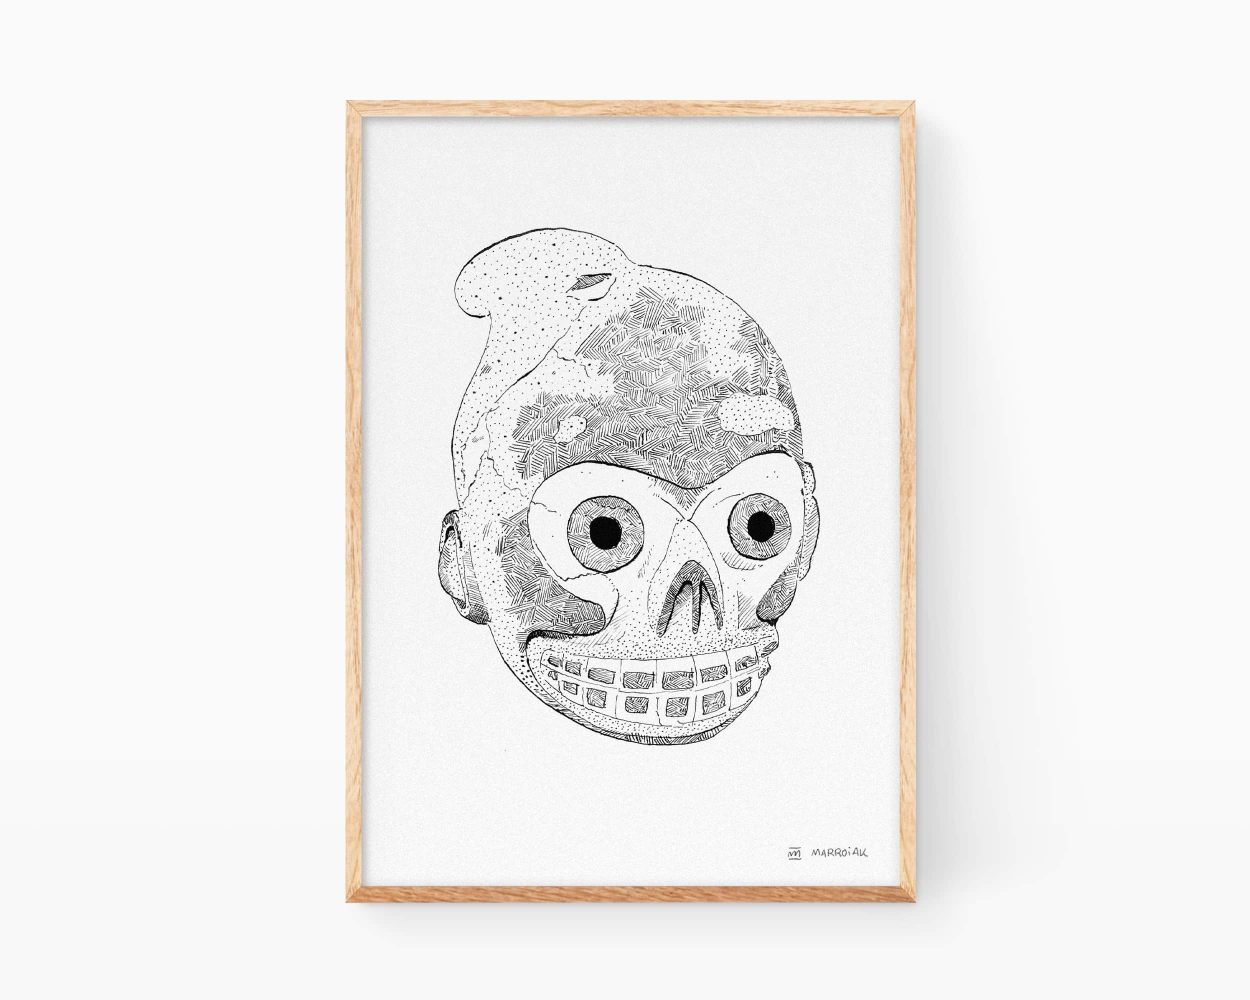 Mayan and Aztec culture sculpture drawing poster. Black and white print for ethnic and exotic decoration of tribal masks.